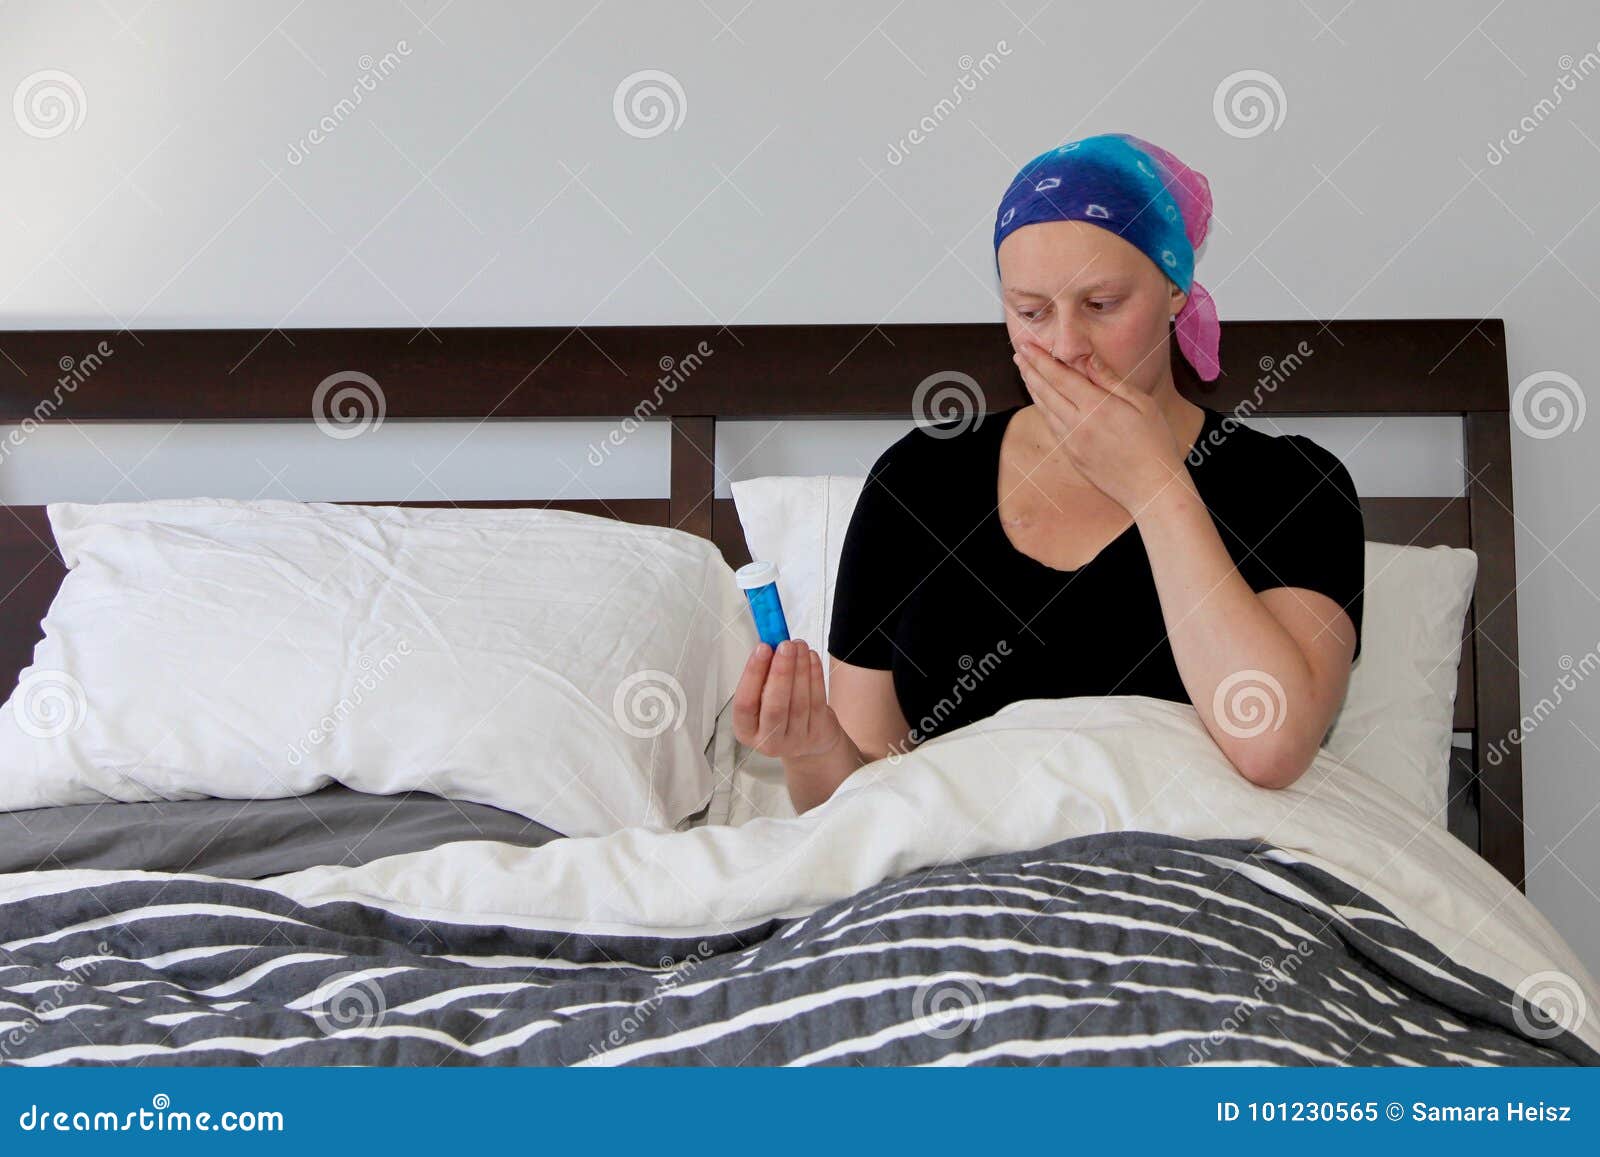 Young Cancer Patient In A Headscarf Rests In Bed With Nausea